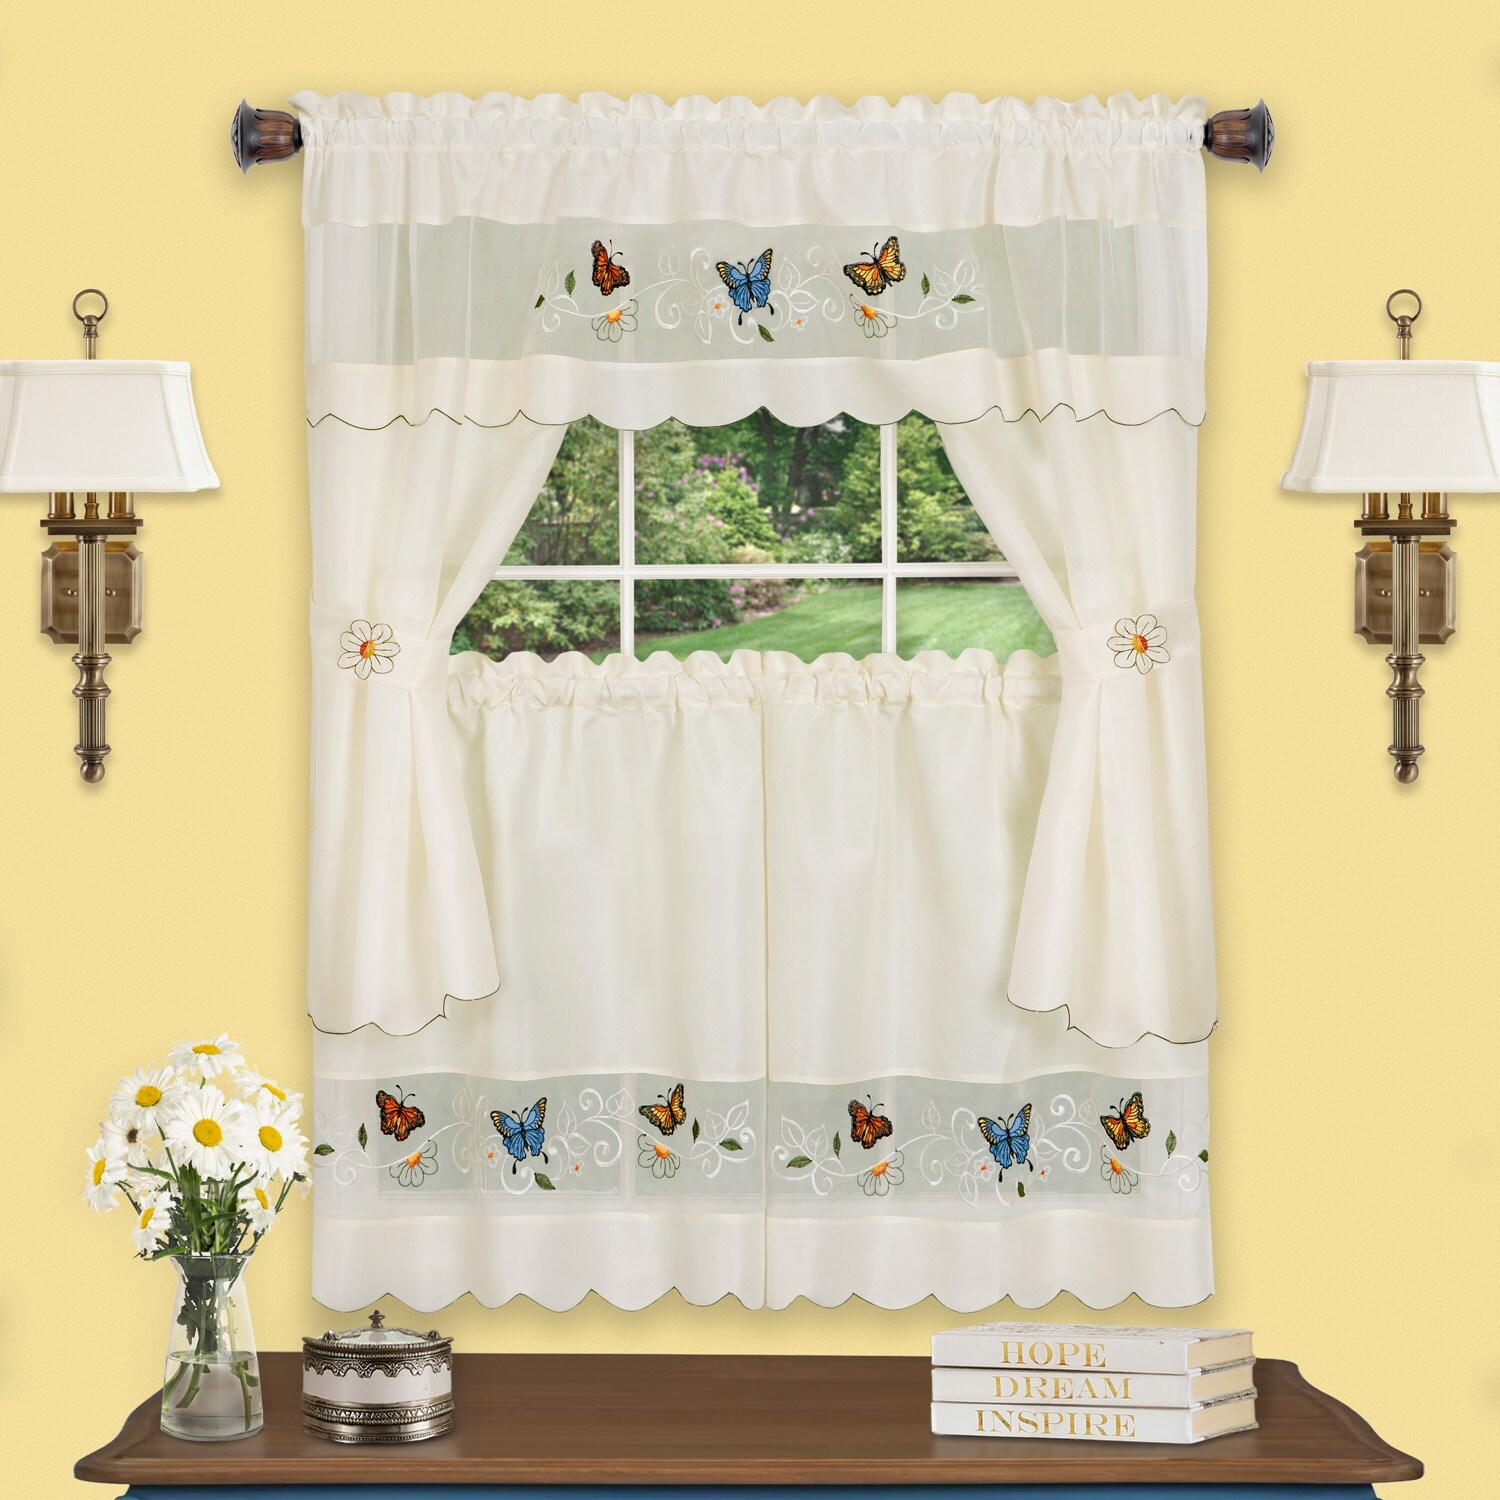 Daisy Dream Kitchen Cafe Curtain Set for Small Windows Grey, Swag and 24 inches Tiers Set Satin Fabric with Matching Color Daisy Embroidery and Lace. 